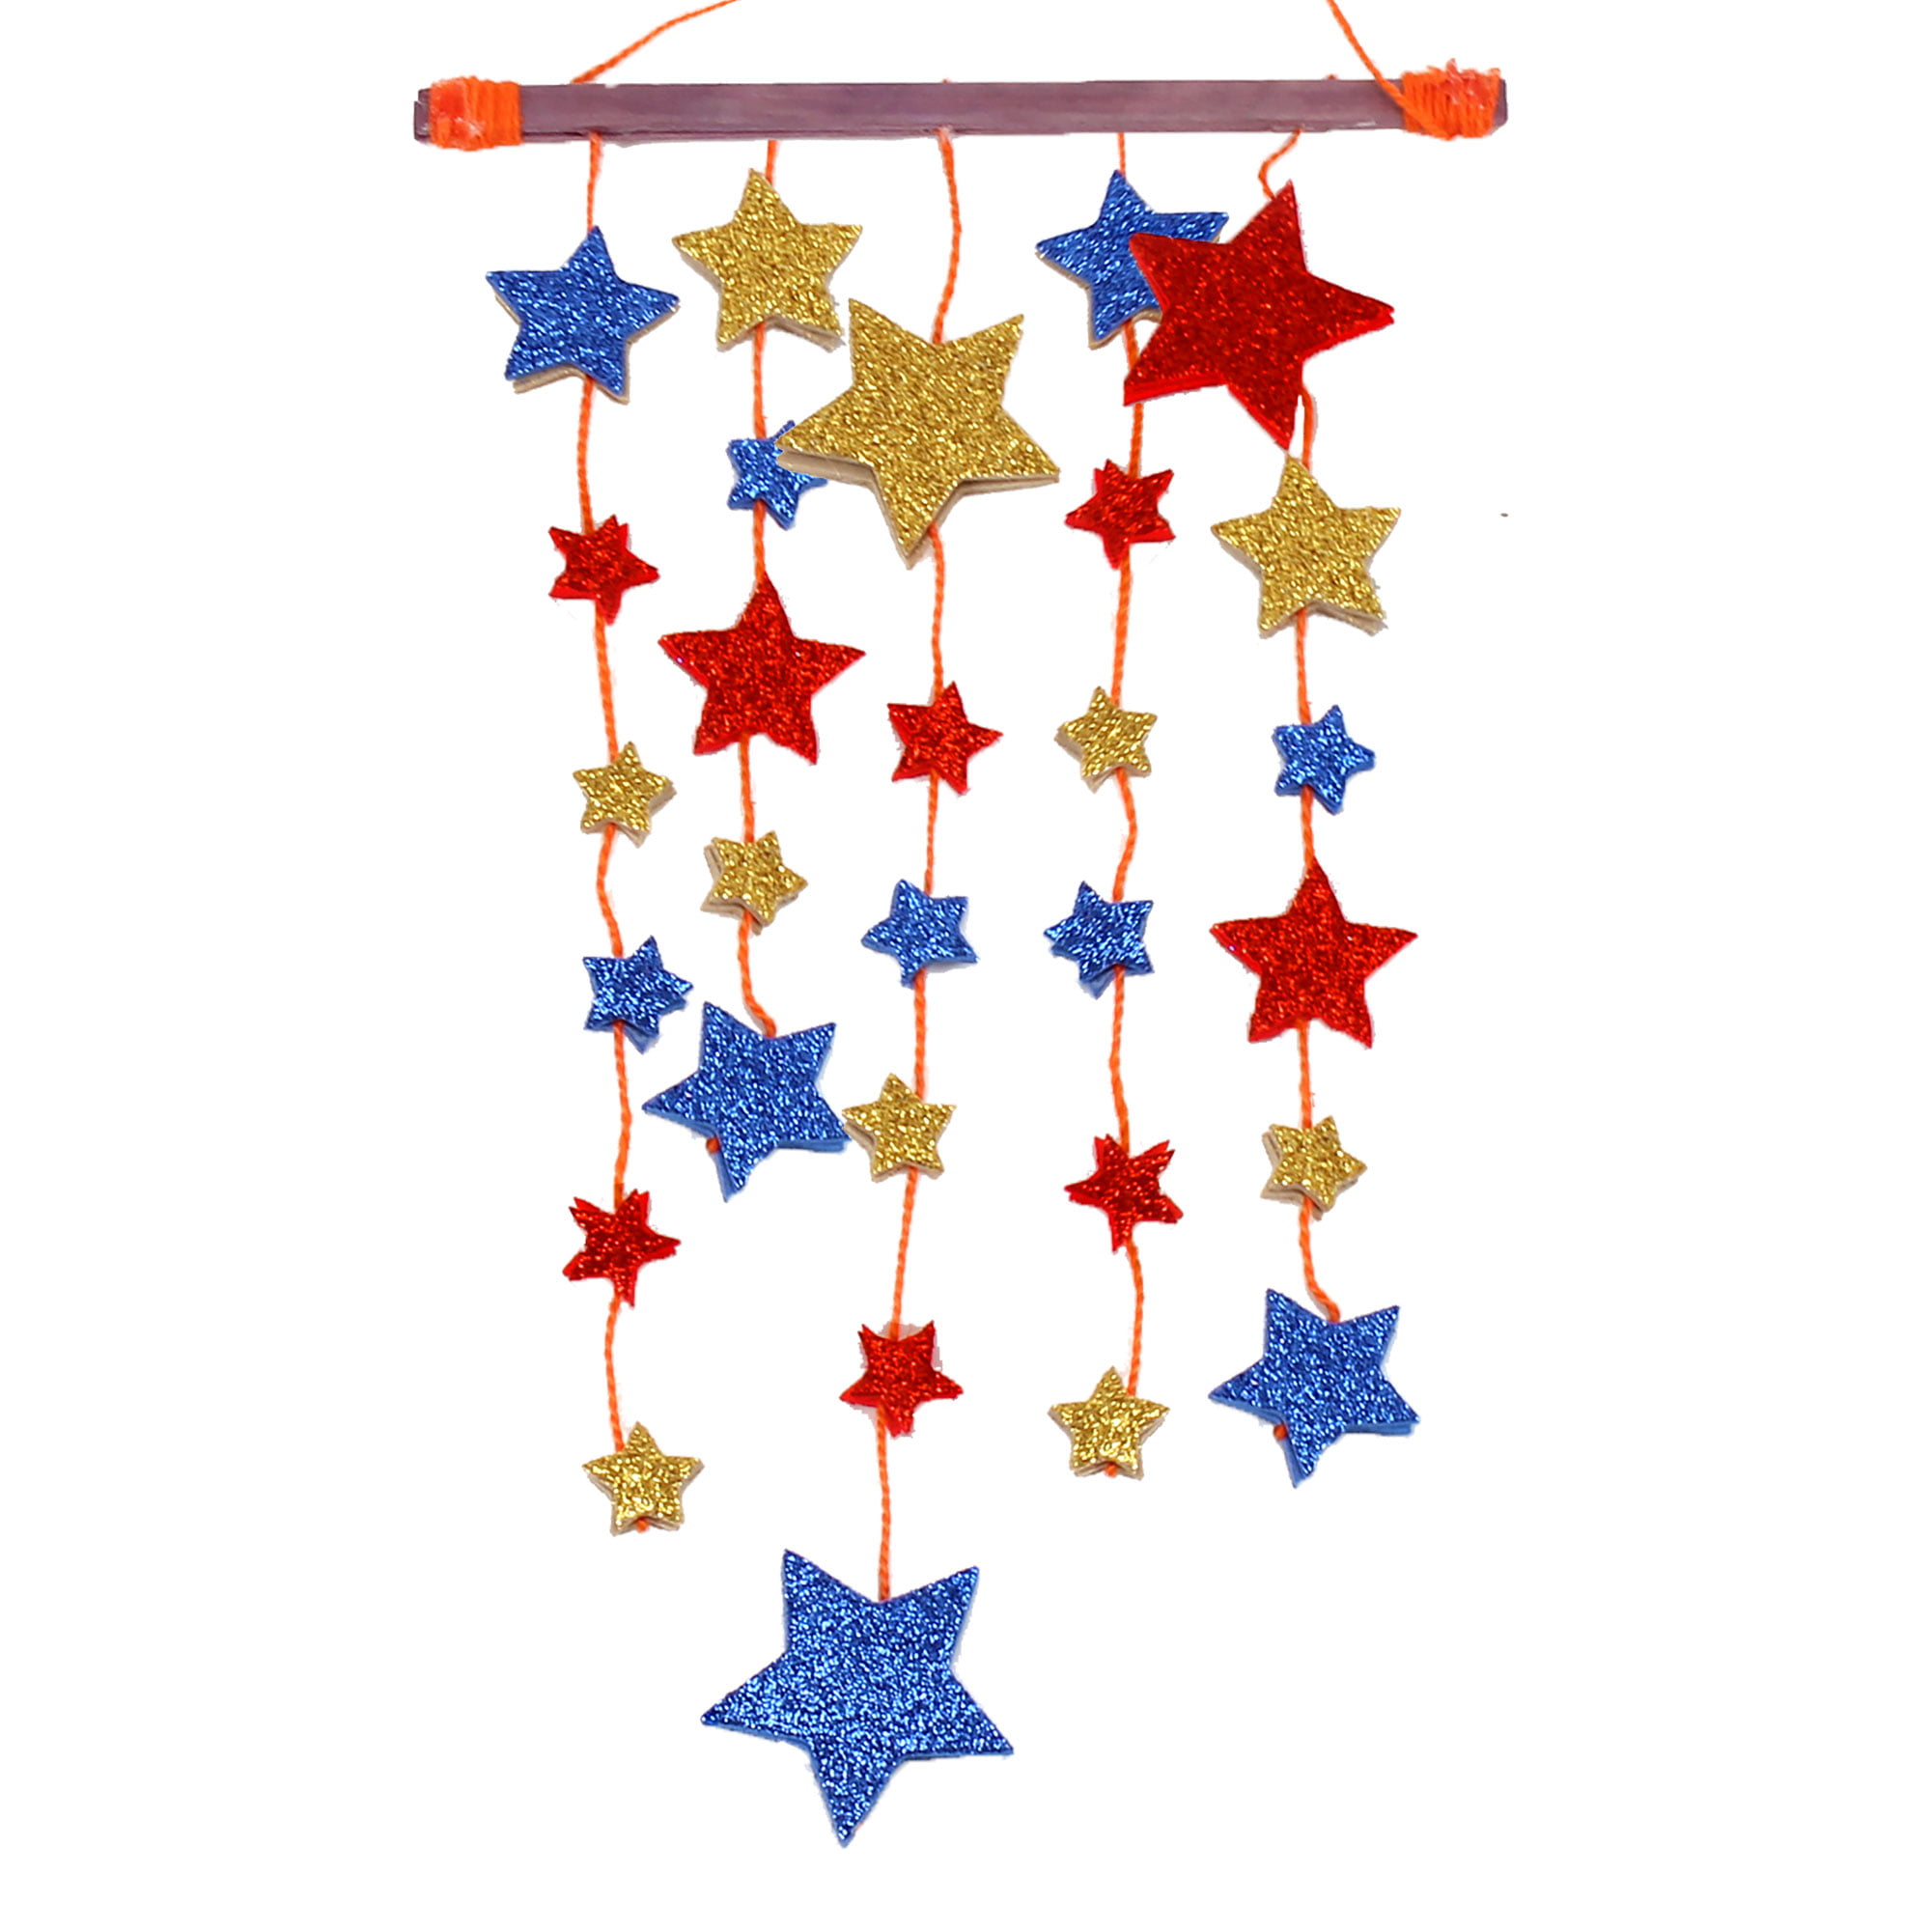 Star Sparkle Stickers - Stickers - The Craft Shop, Inc.